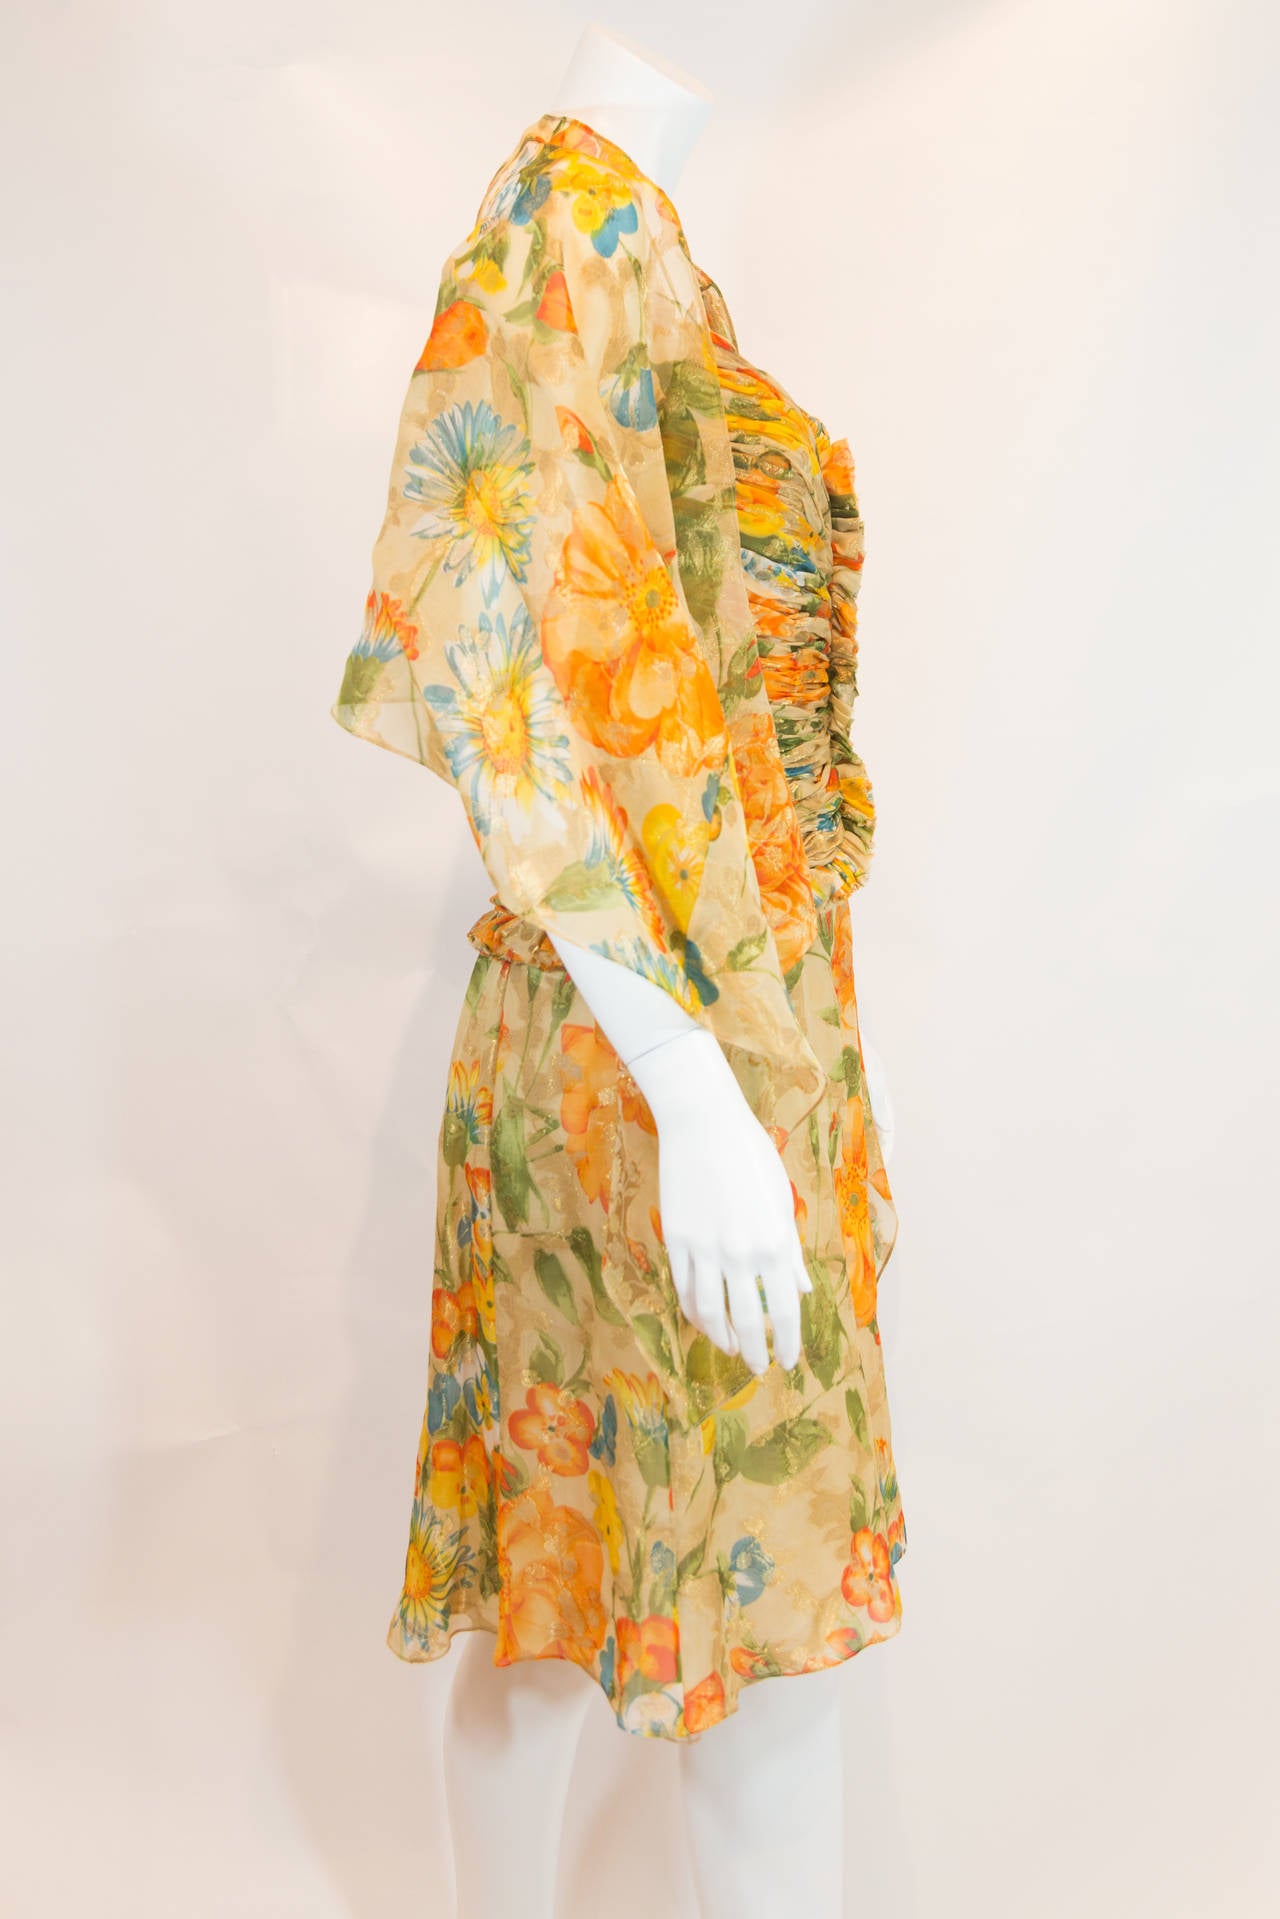 This printed gown is absolutely flawless. Its gathered material forms a complimentary cinch down the midline. Contains impeccable floral print, a gorgeous V-neckline, and a matching scarf that can be draped over the gown in any preferred fashion.